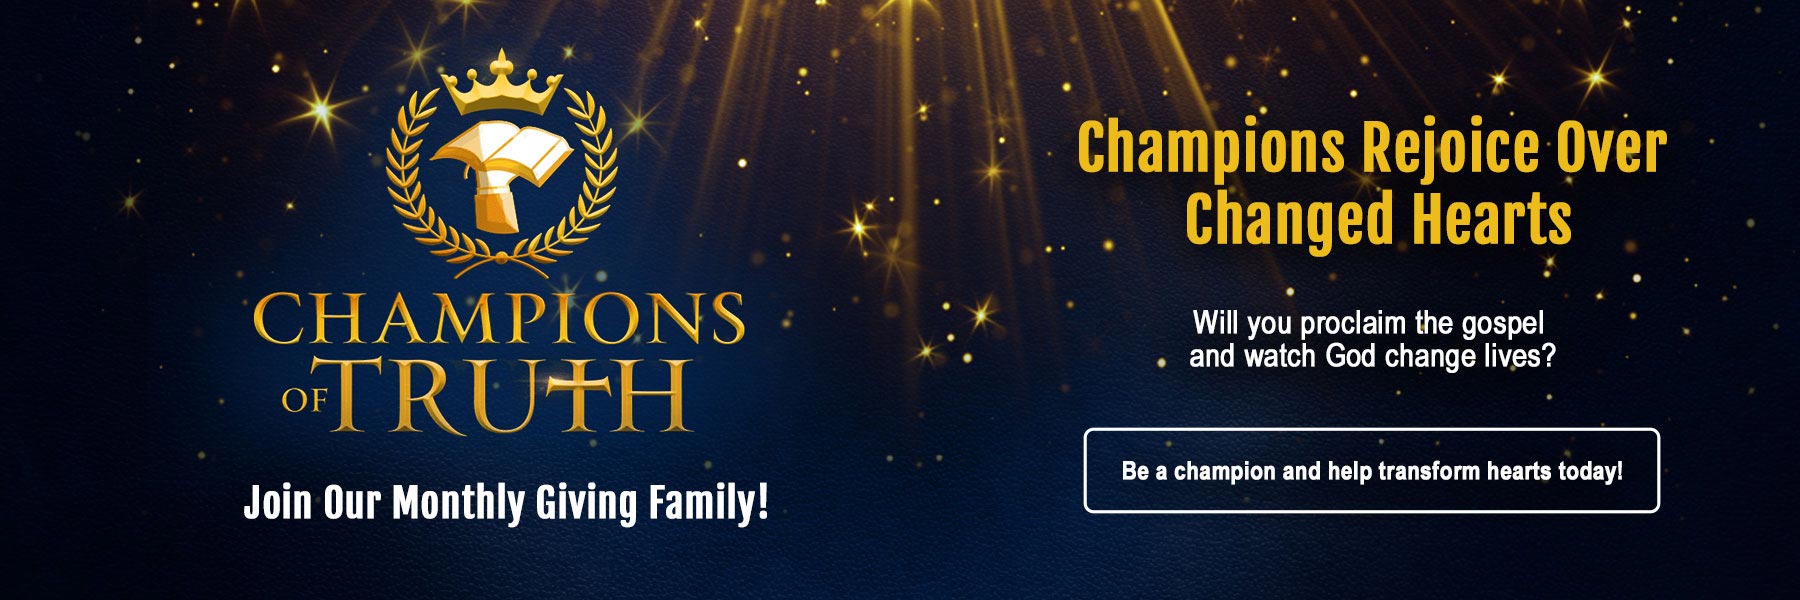 Champions of Truth logo with title text